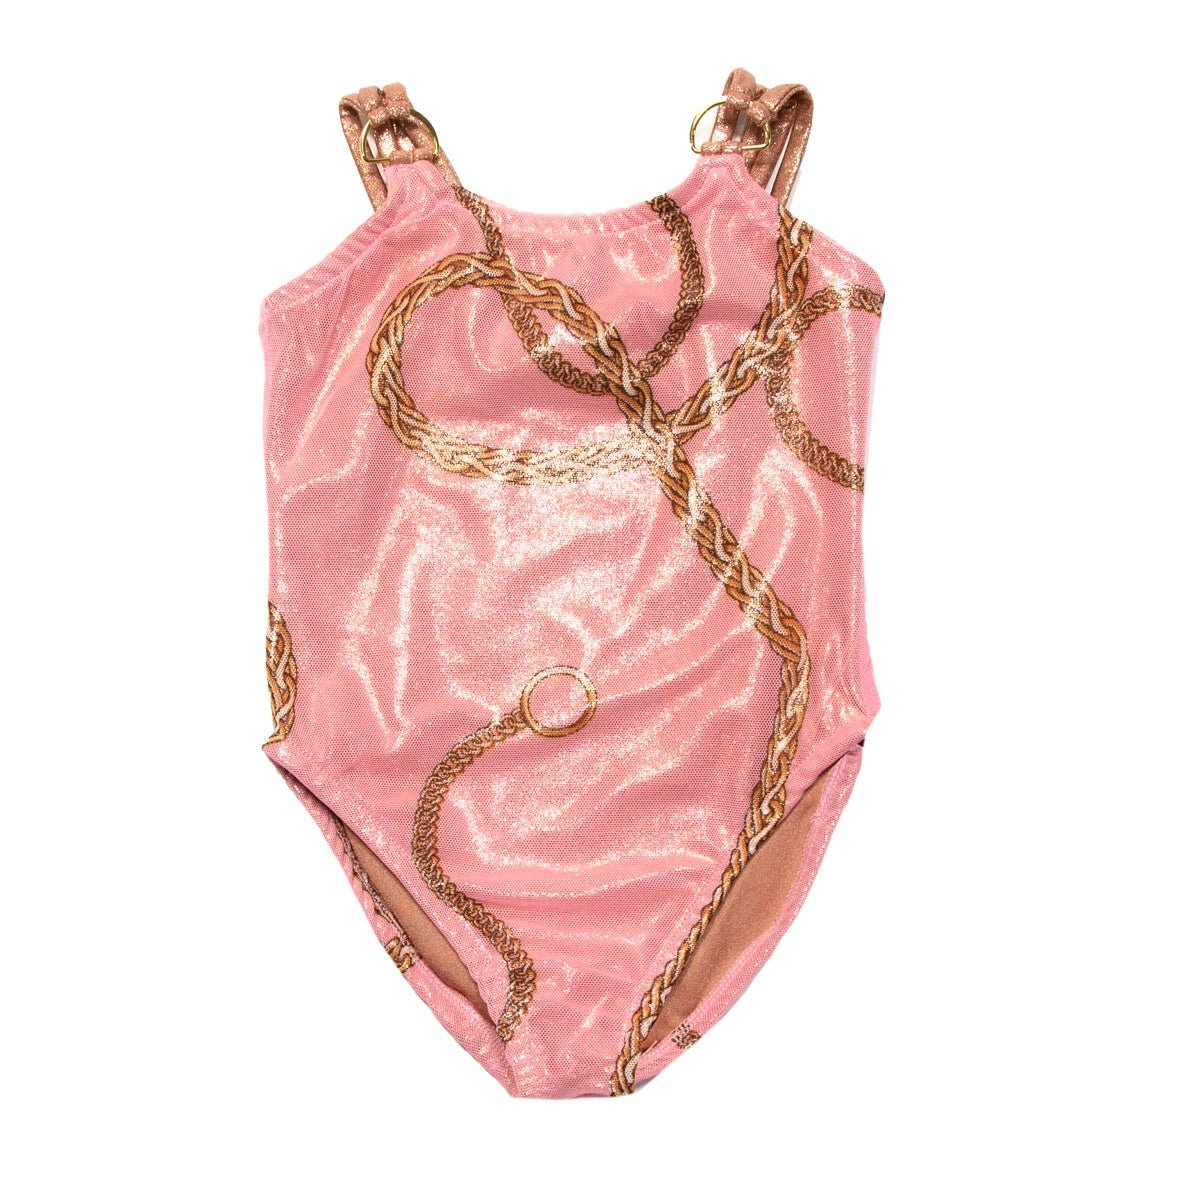 METALLIC SHIMMERY CHAIN ONE PIECE SWIMSUIT - ONE PIECE SWIMSUIT